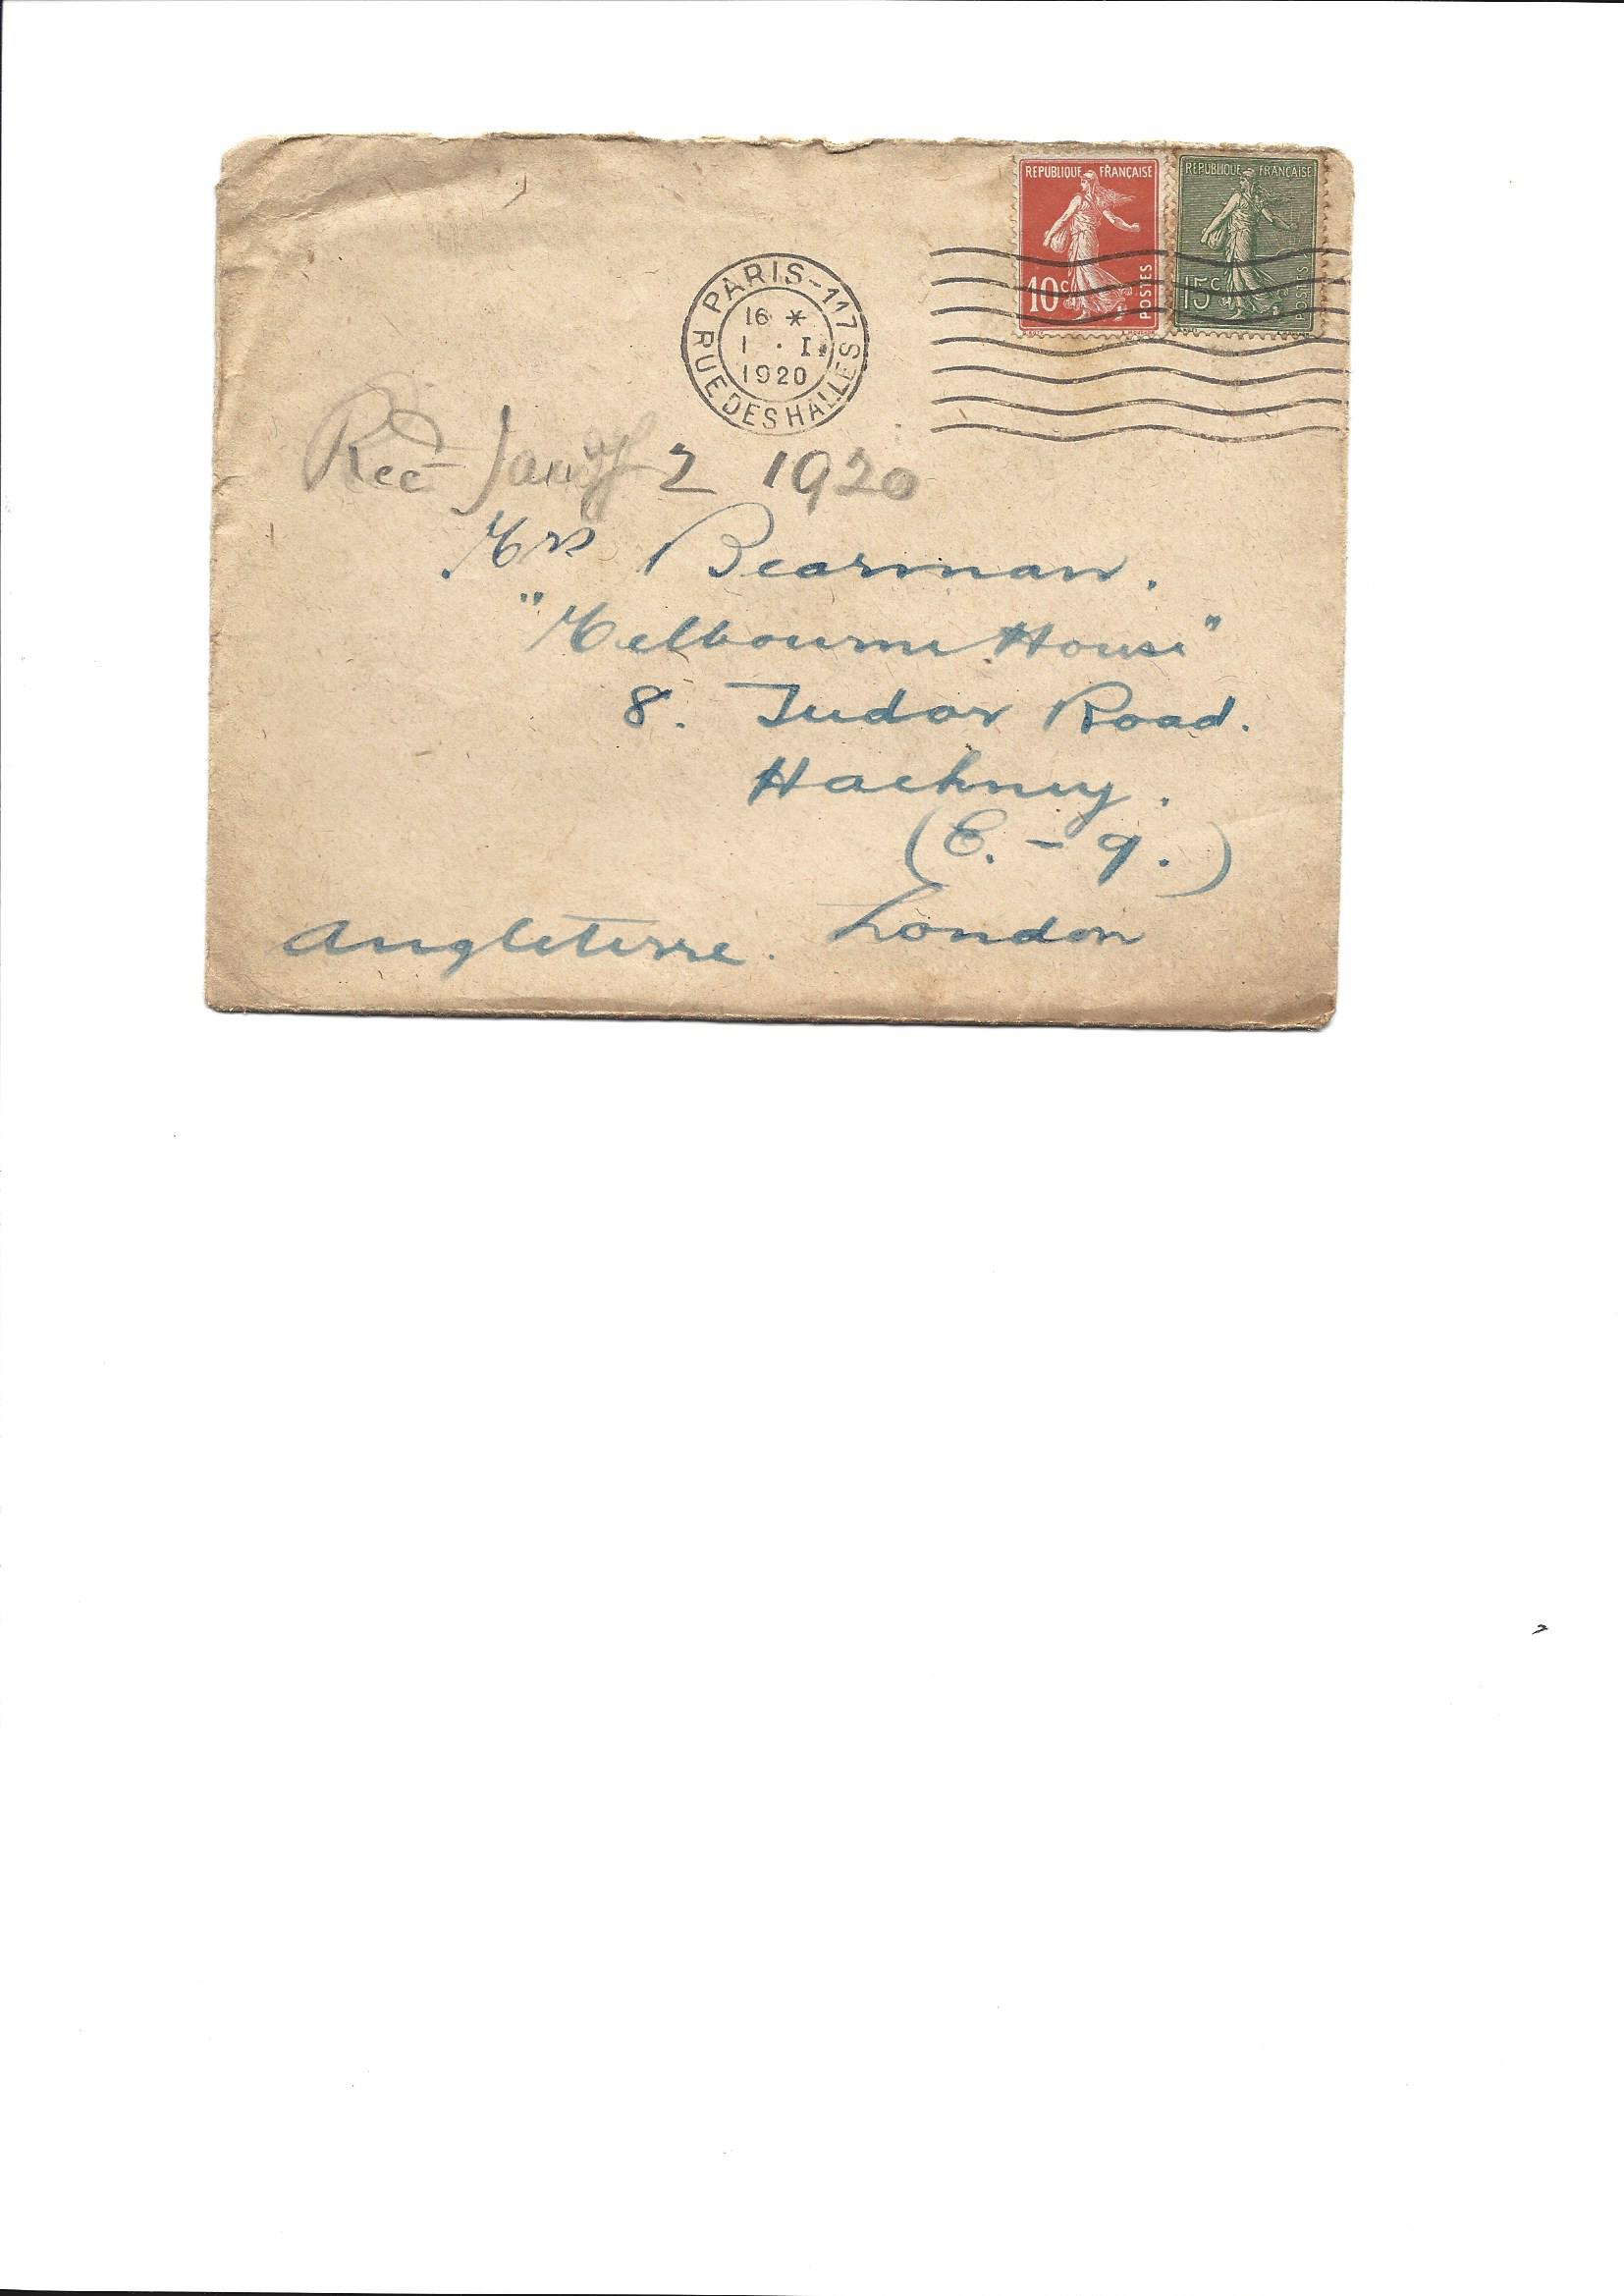 1919-12-31 page 1 letter by Donald Bearman